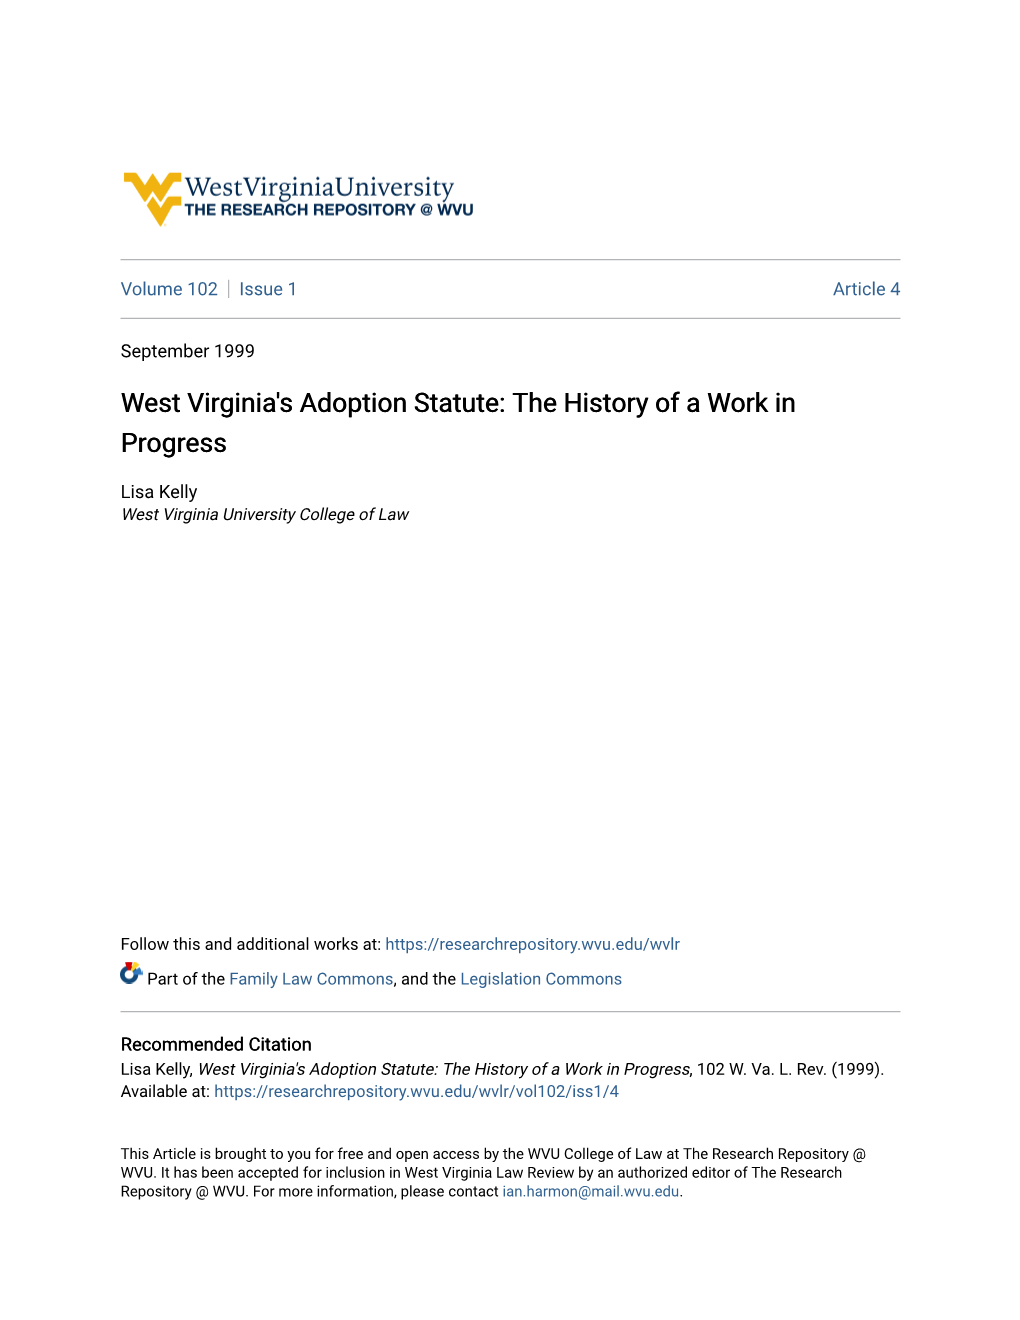 West Virginia's Adoption Statute: the History of a Work in Progress